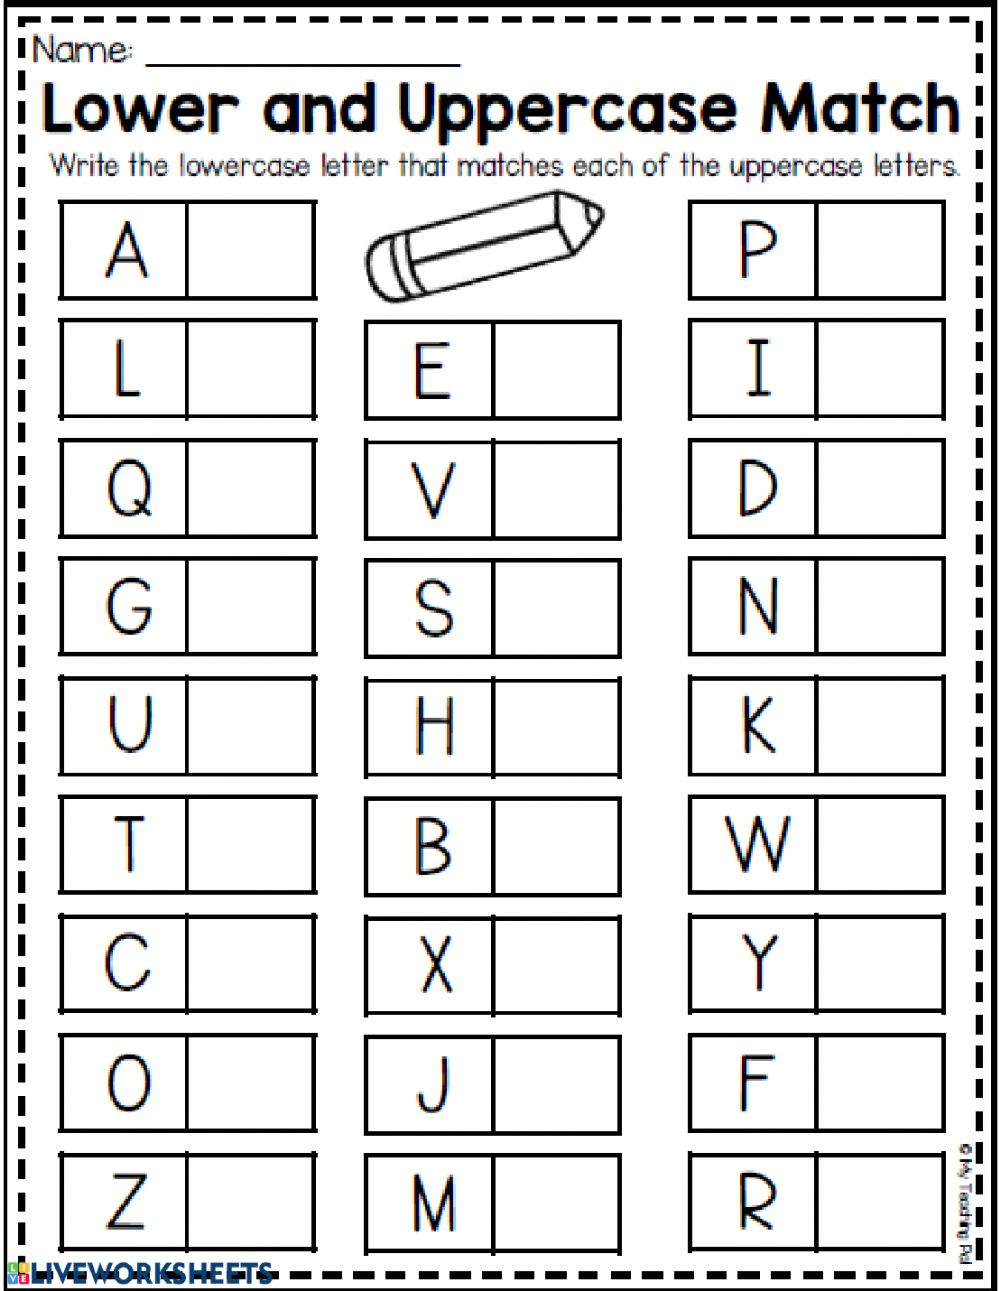 matching-lowercase-and-uppercase-letters-worksheets